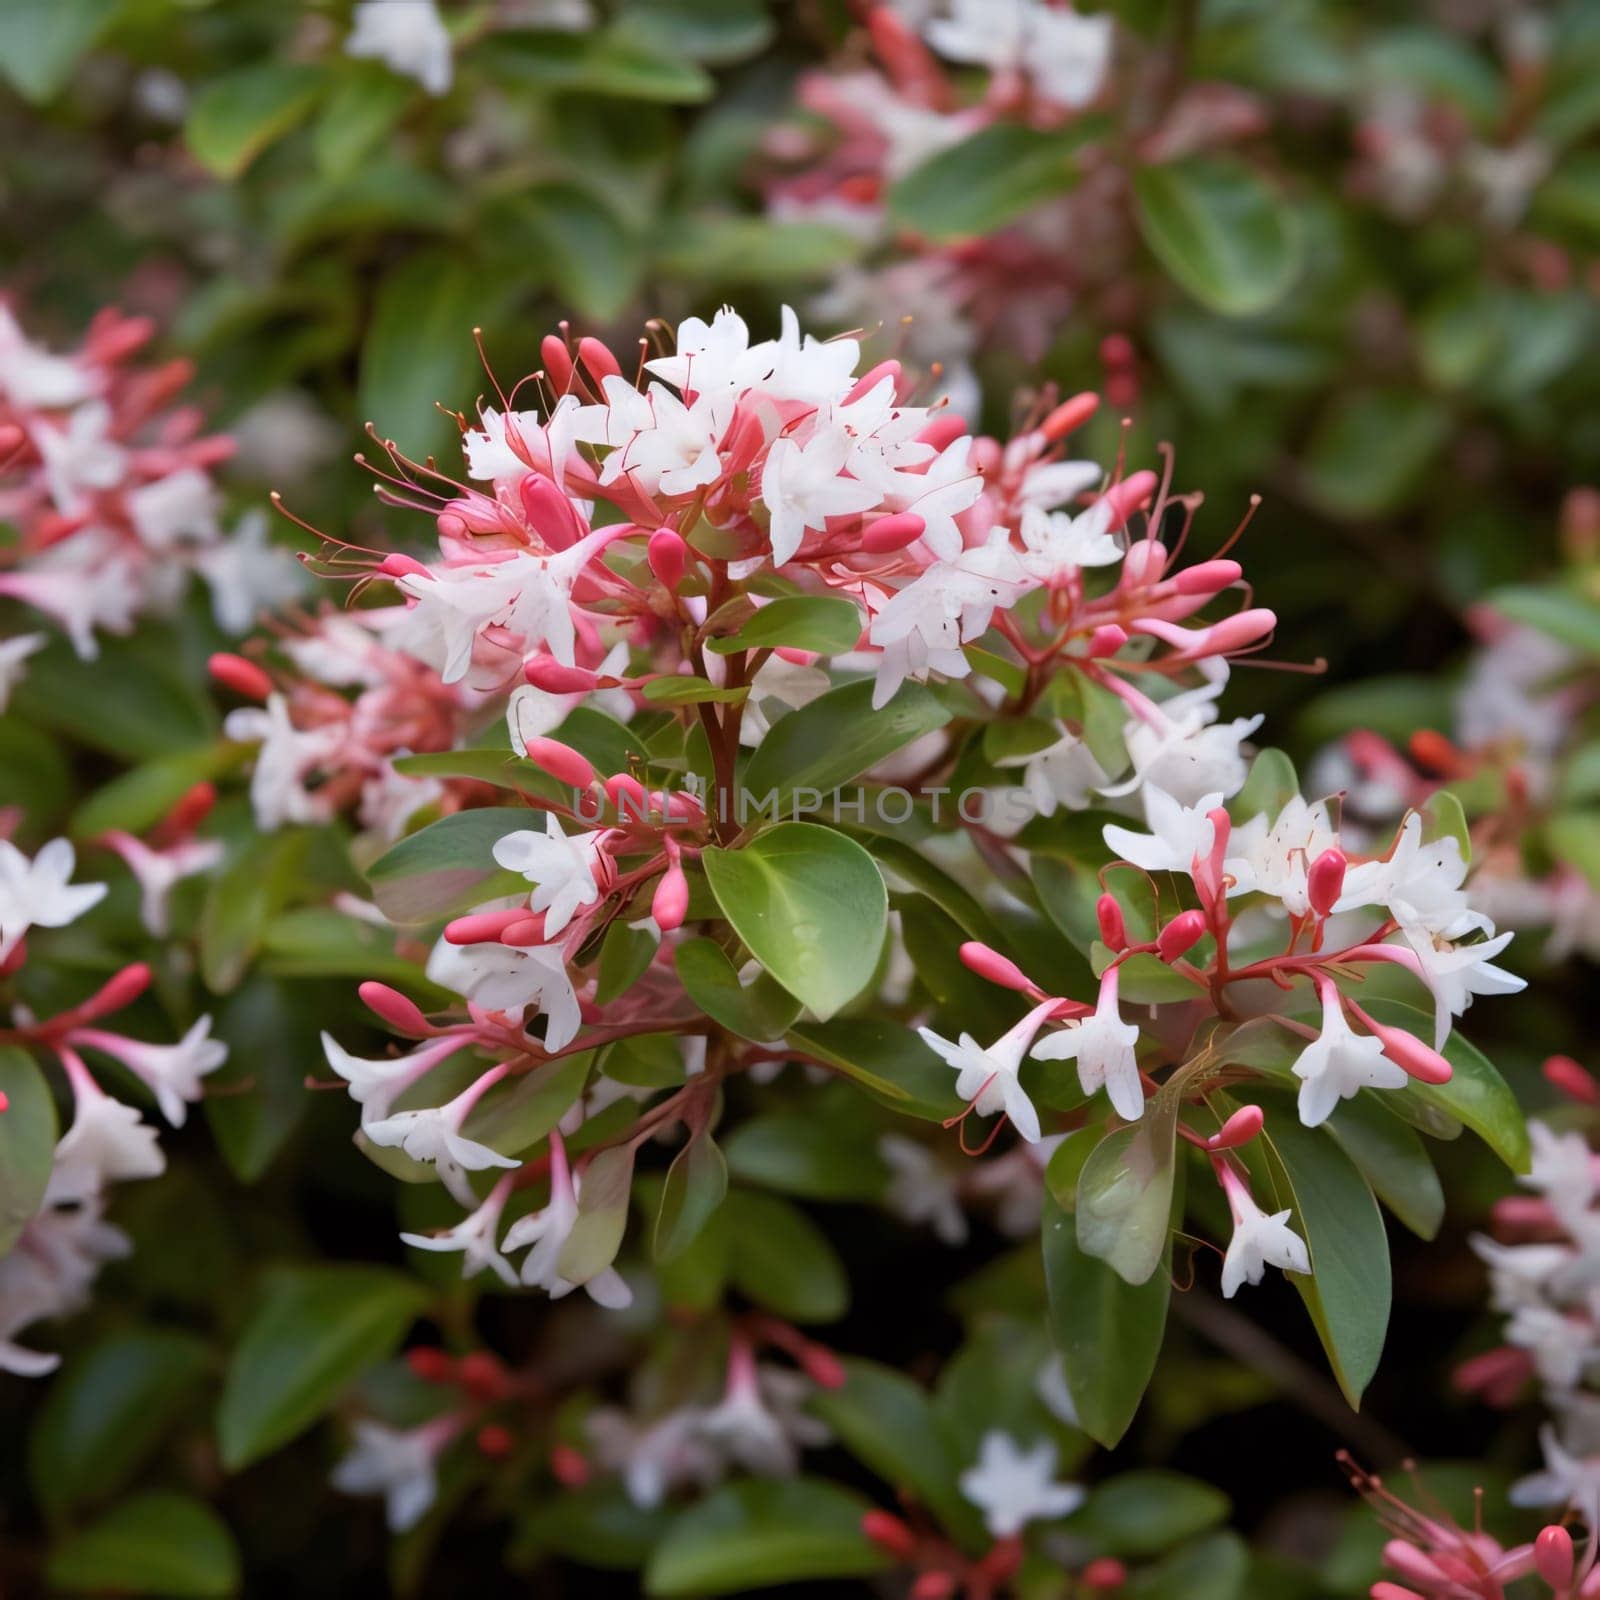 Tiny pink and white flowers with green leaves.Flowering flowers, a symbol of spring, new life. by ThemesS